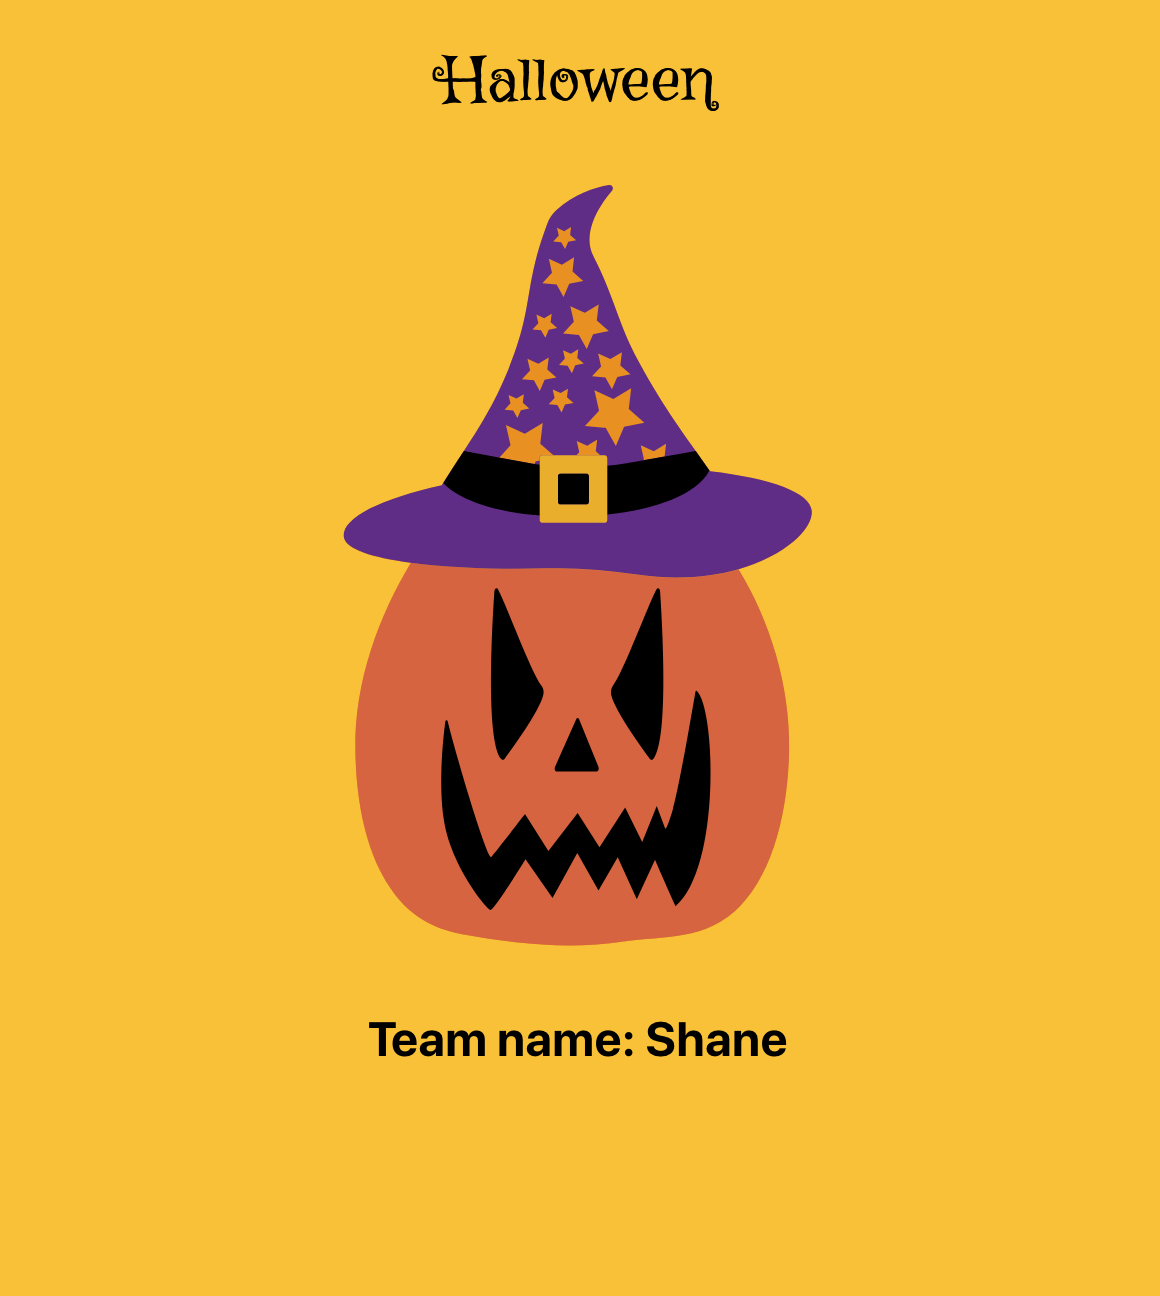 Screenshot showing the page players see, with a pumpkin in the middle that acts as a buzzer.